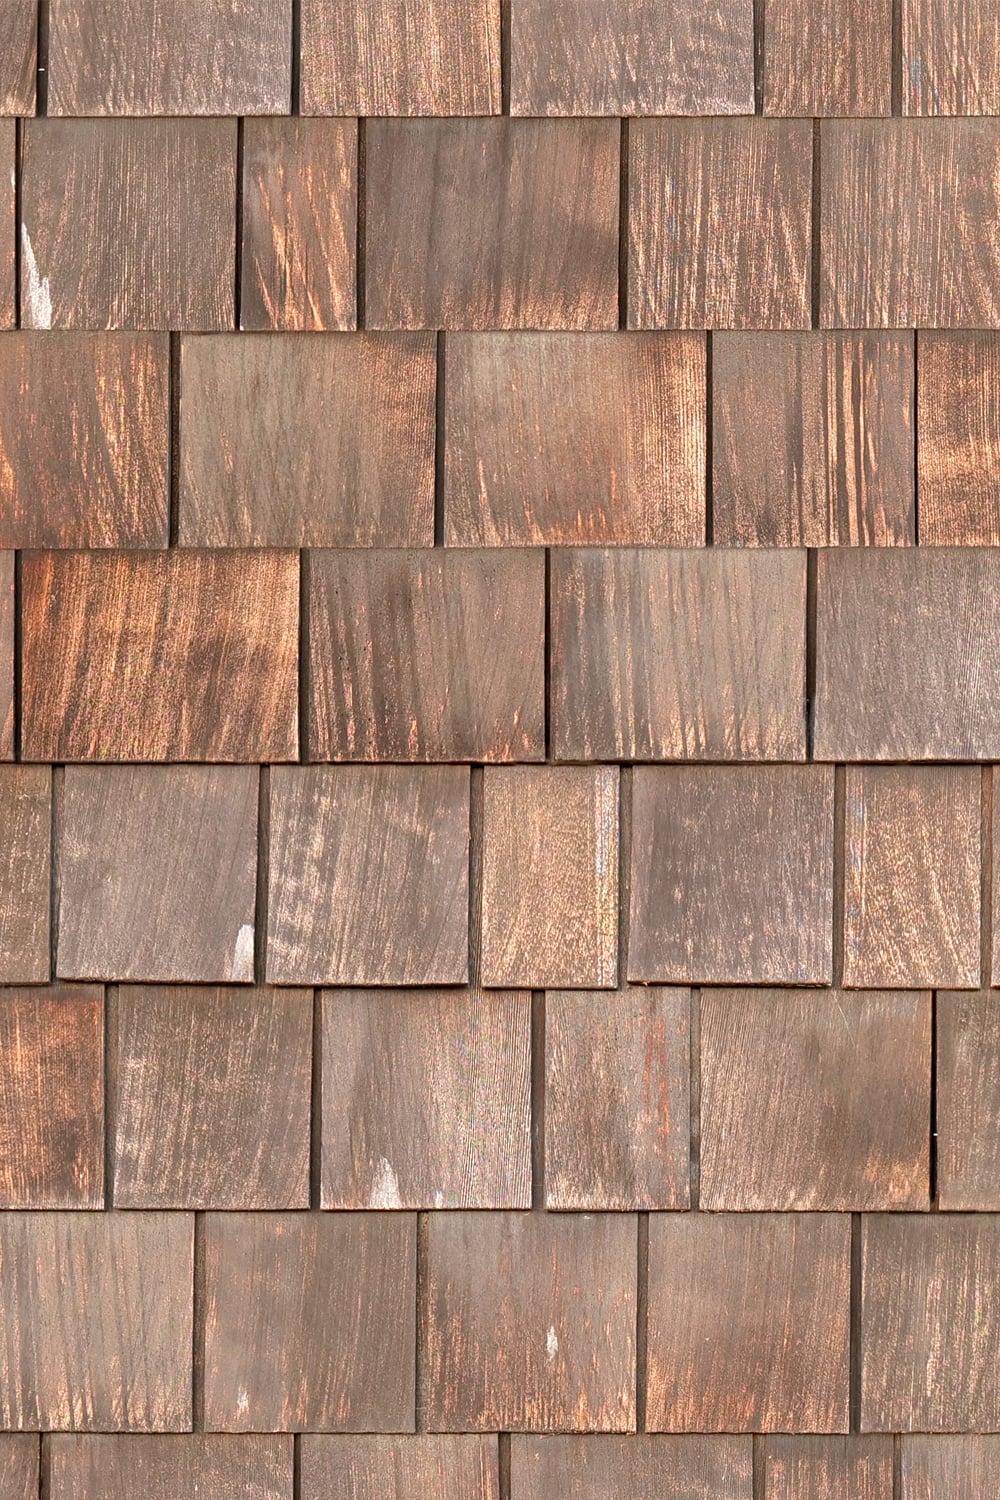 aged vertical wooden shingles - close up